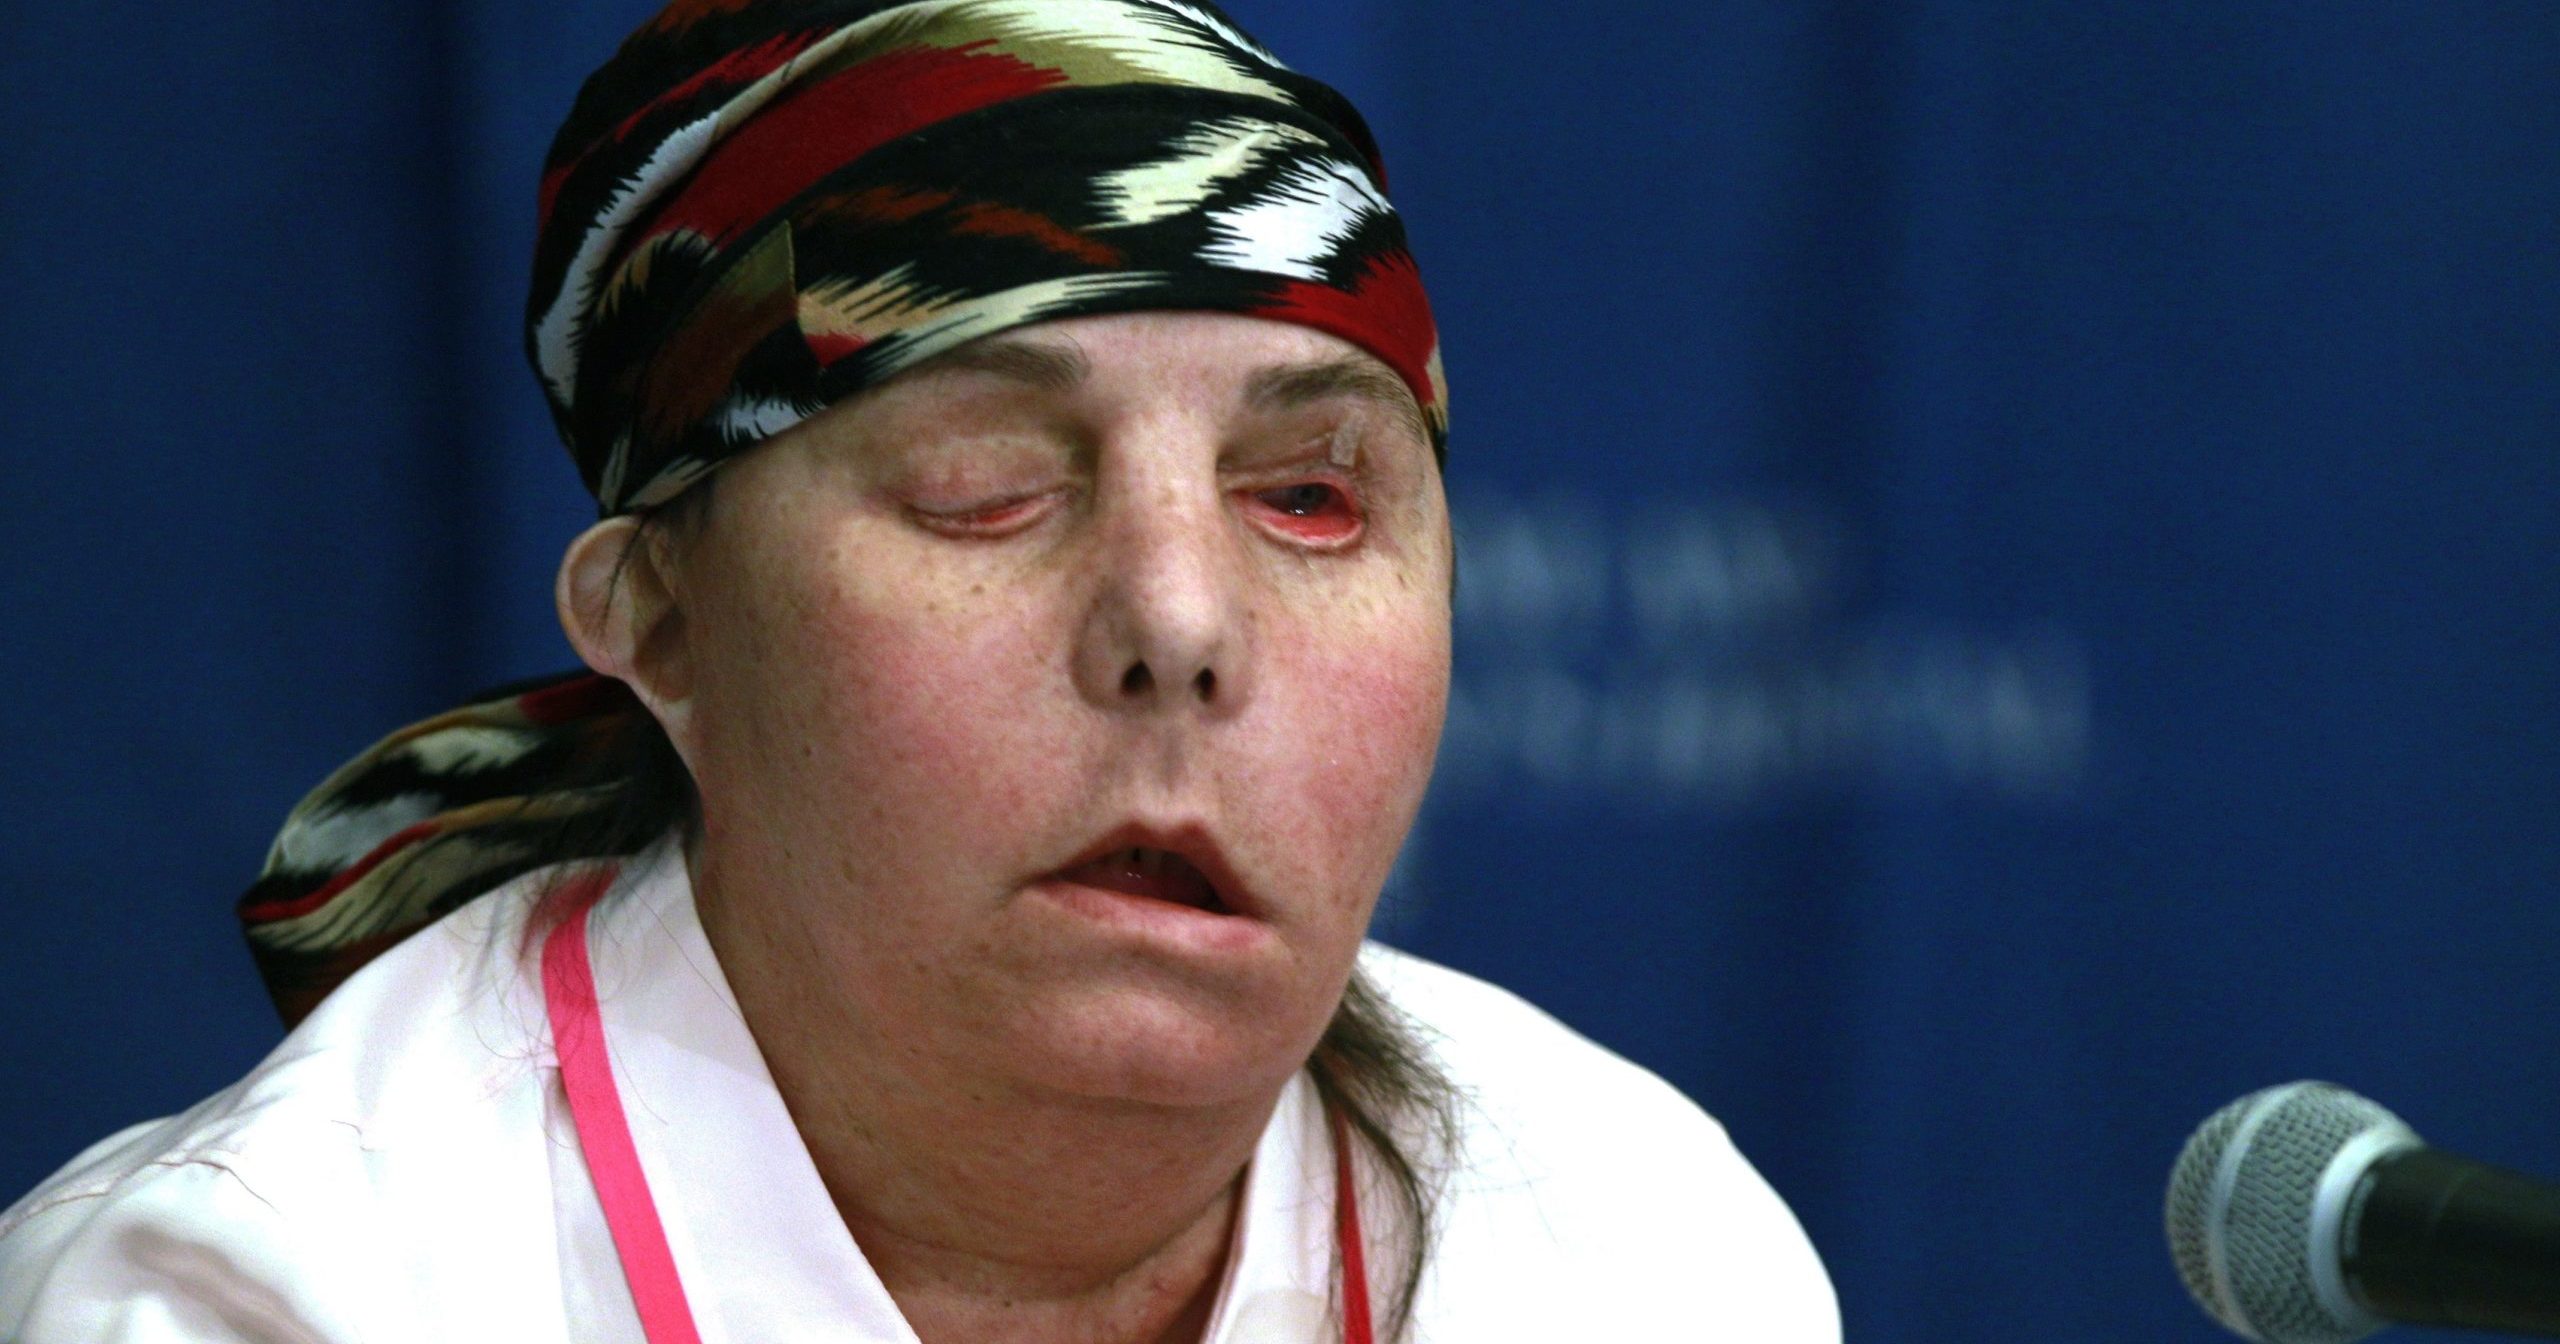 In this May 1, 2013, file photo, Carmen Blandin Tarleton speaks at Brigham and Women's Hospital in Boston following a face transplant. In July 2020, Tarleton became the first American and only the second person globally to undergo a second face transplant procedure after her first transplant failed.